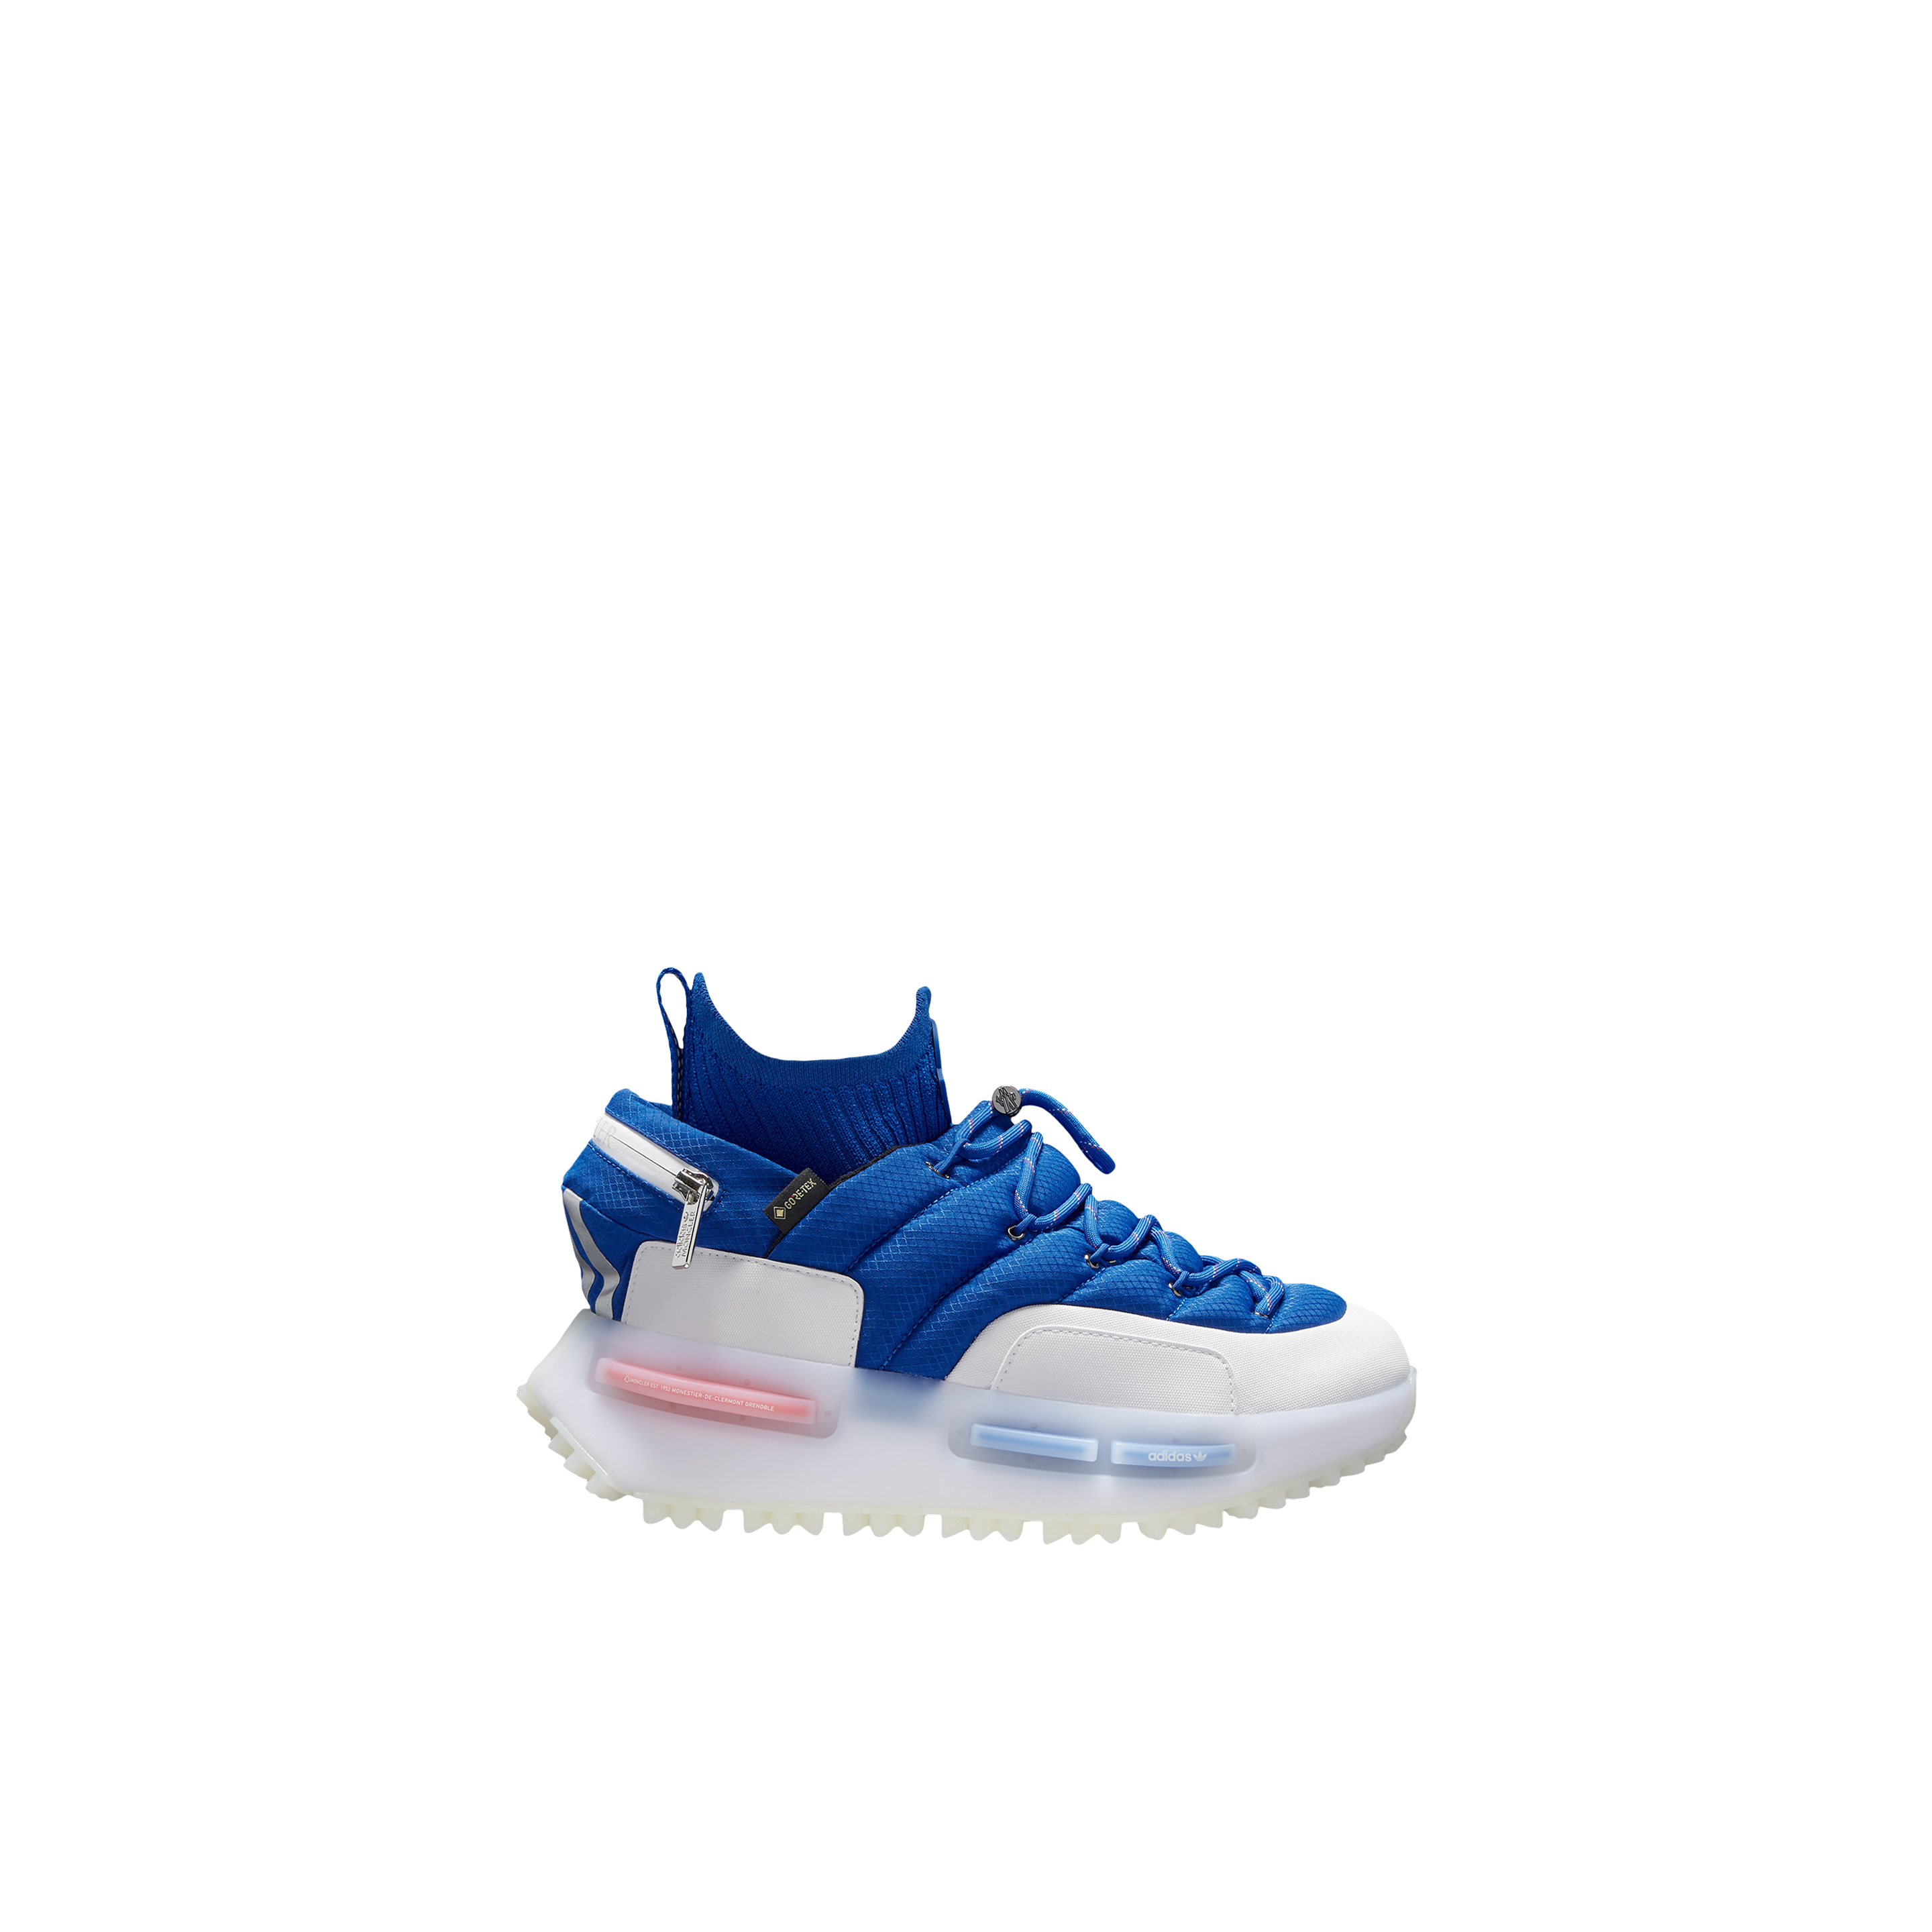 Moncler X Adidas Nmd S1 运动鞋 In Blue